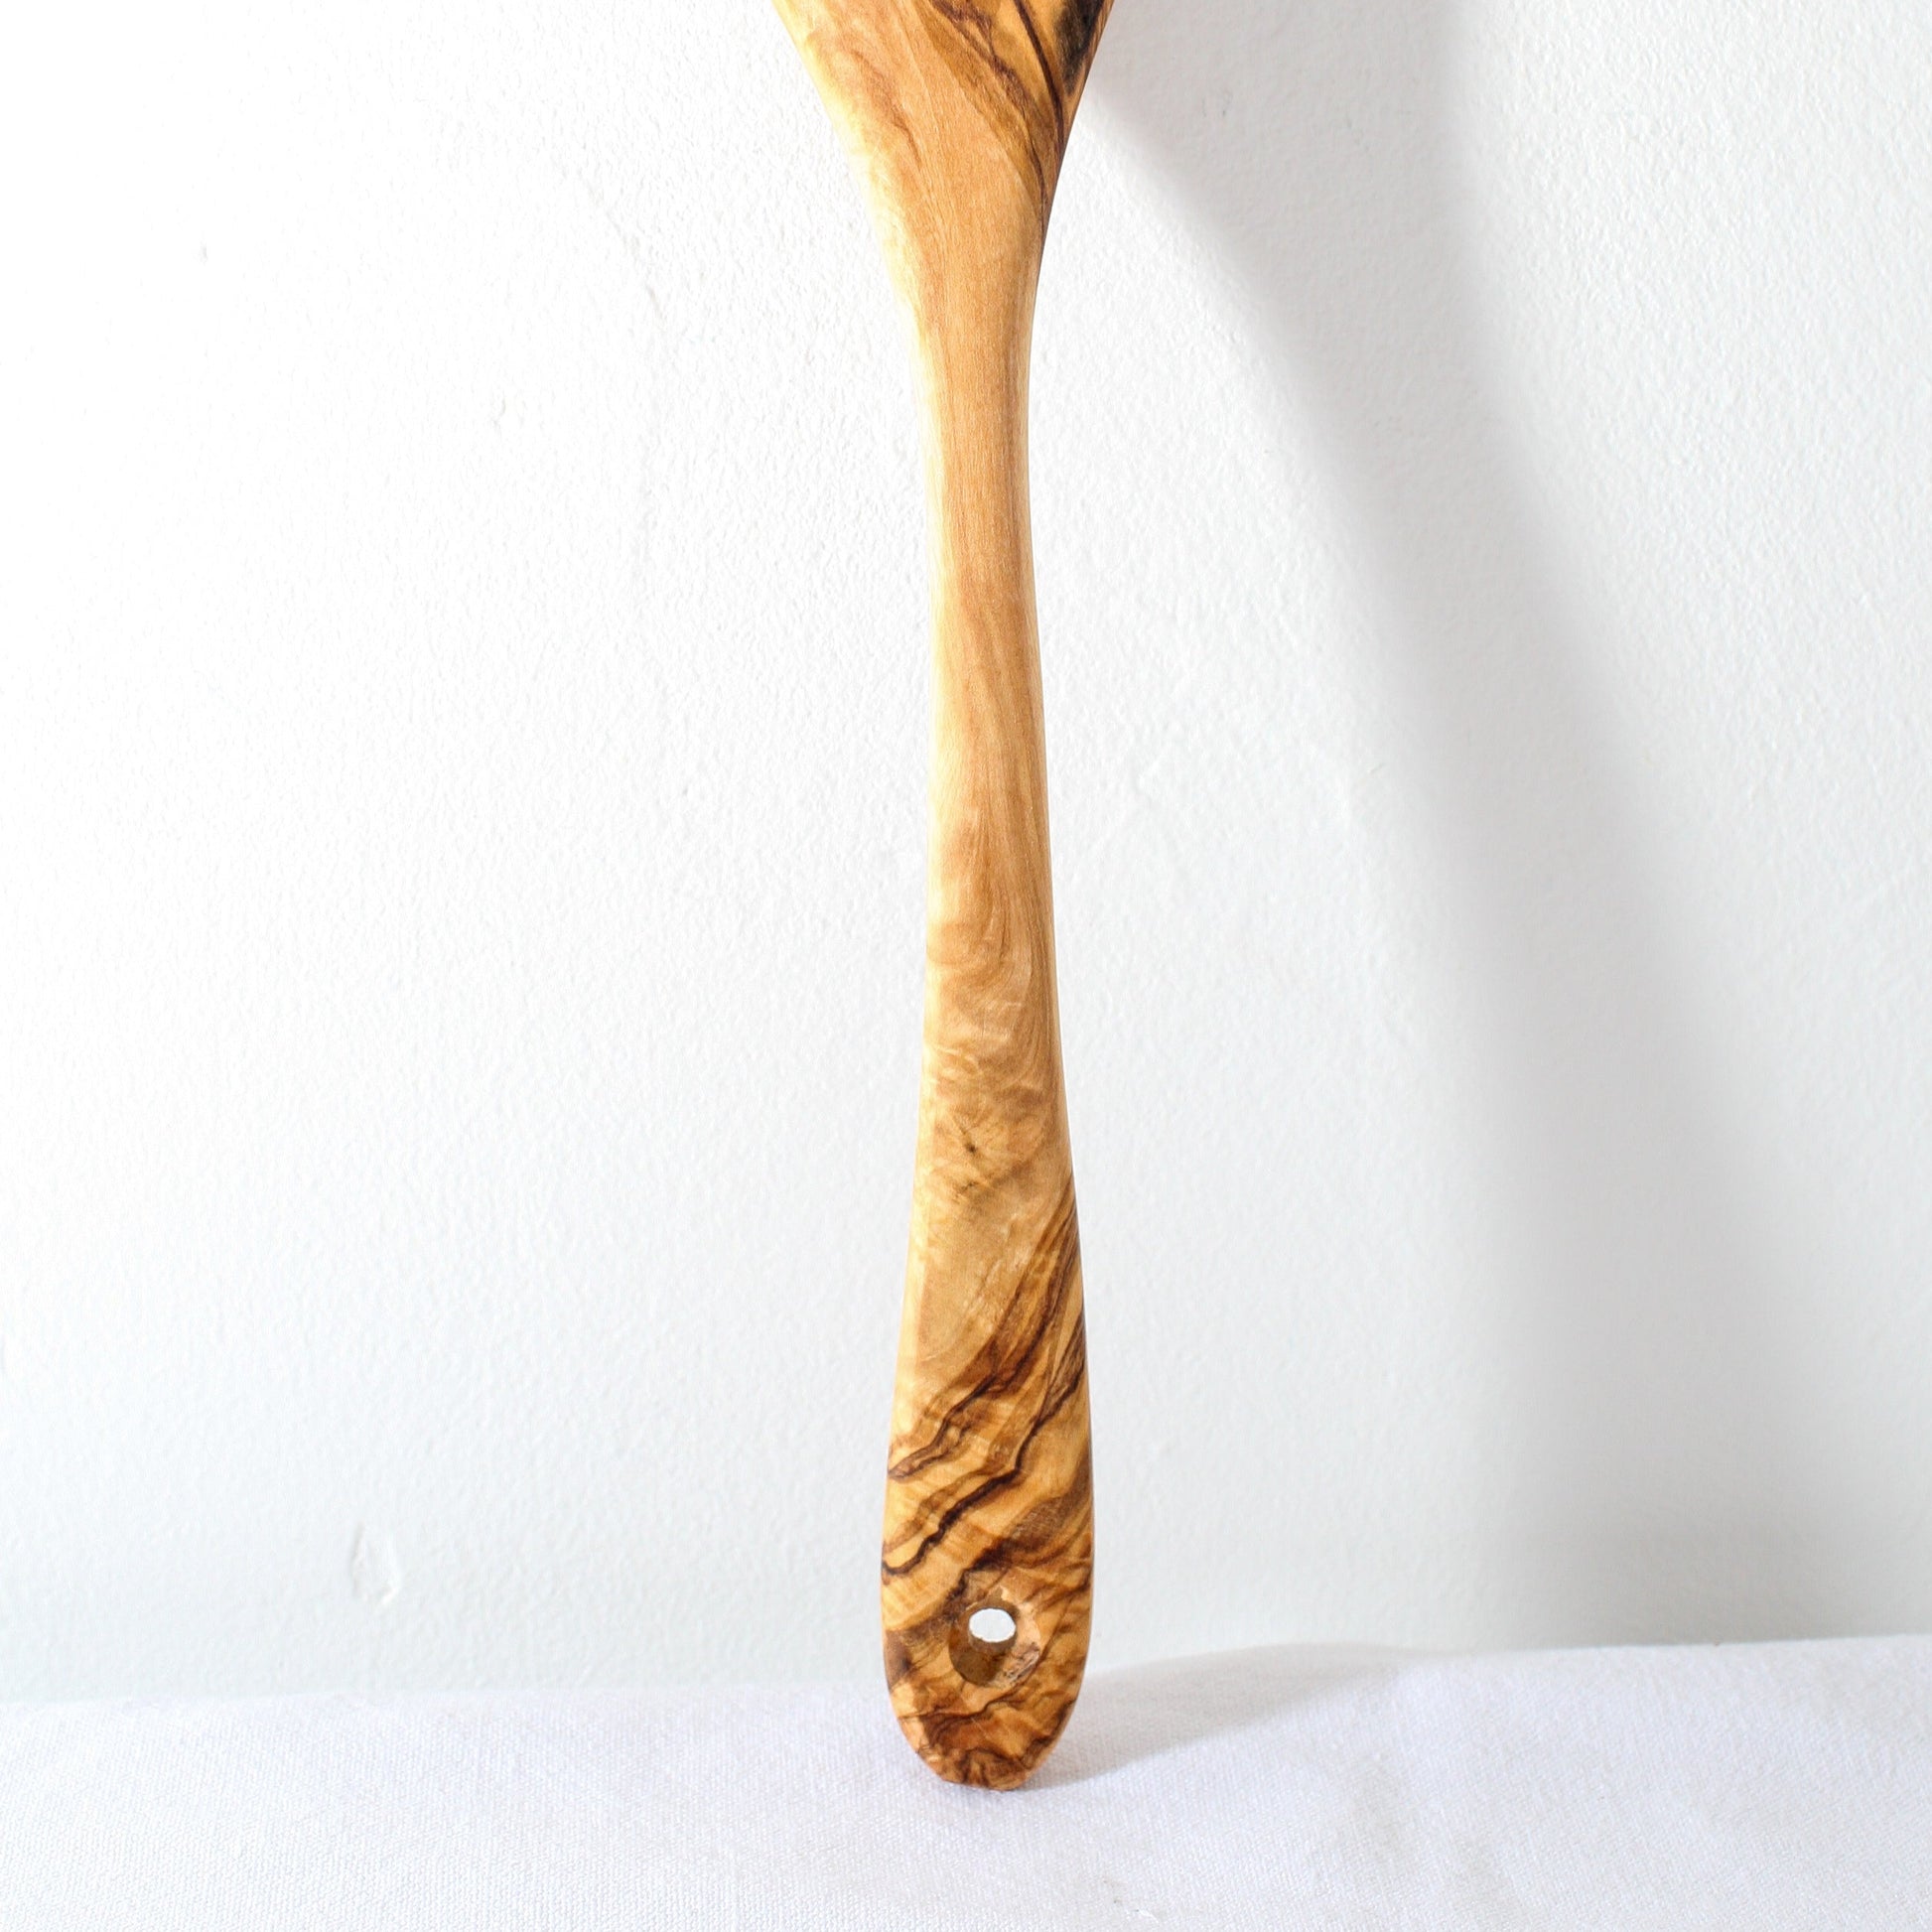 the handle of an olive wood kitchen spoon